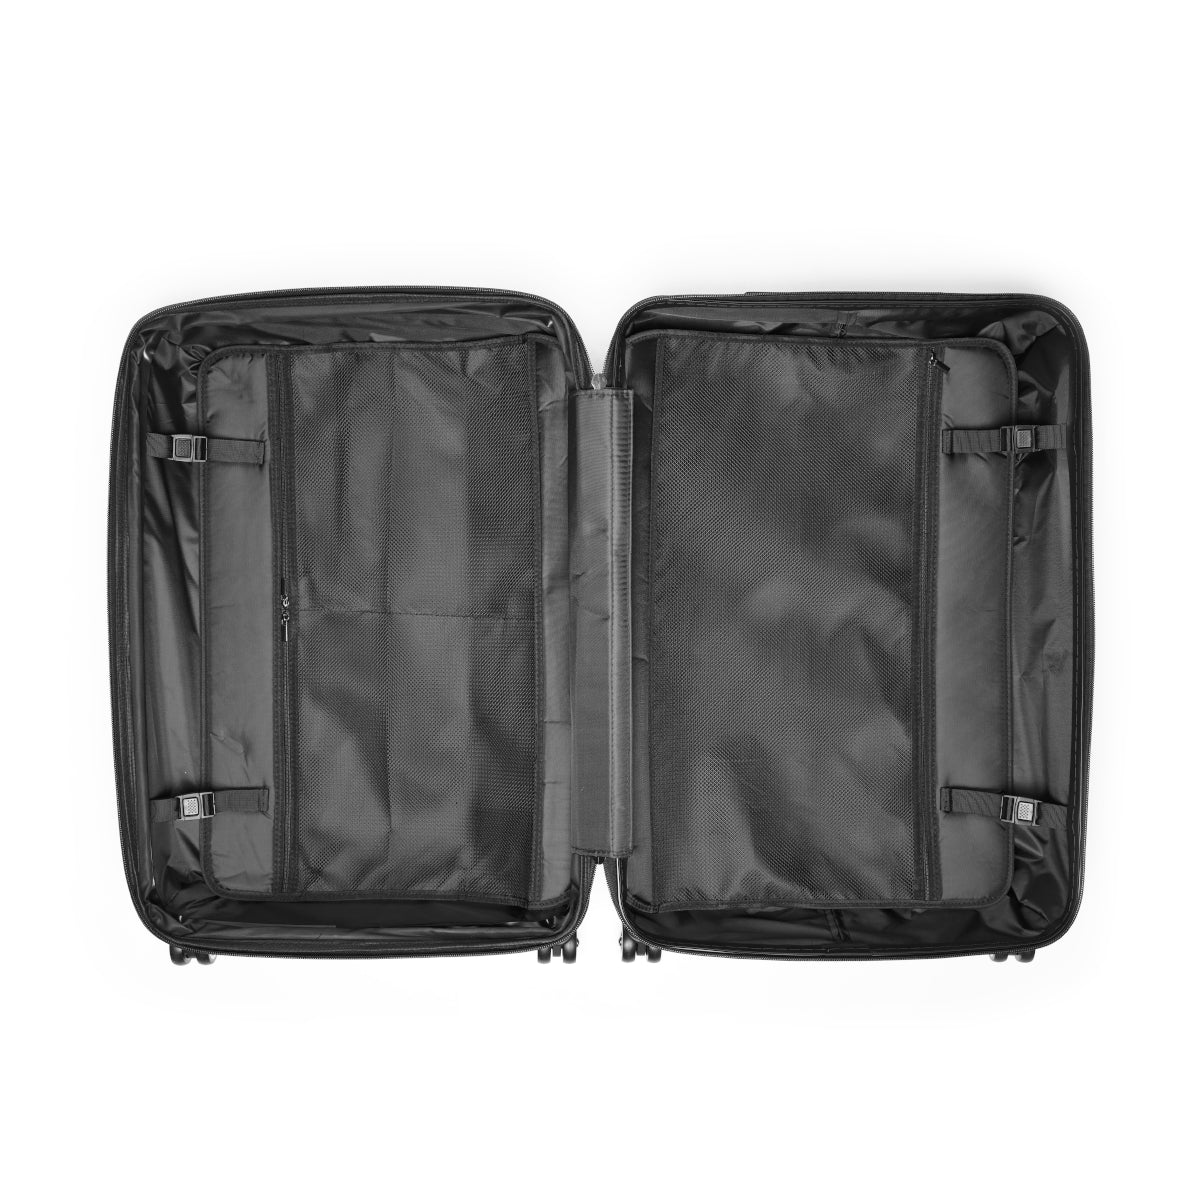 Getrott Belshazzars Feast by Rembrandt Black Cabin Suitcase Inner Pockets Extended Storage Adjustable Telescopic Handle Inner Pockets Double wheeled Polycarbonate Hard-shell Built-in Lock